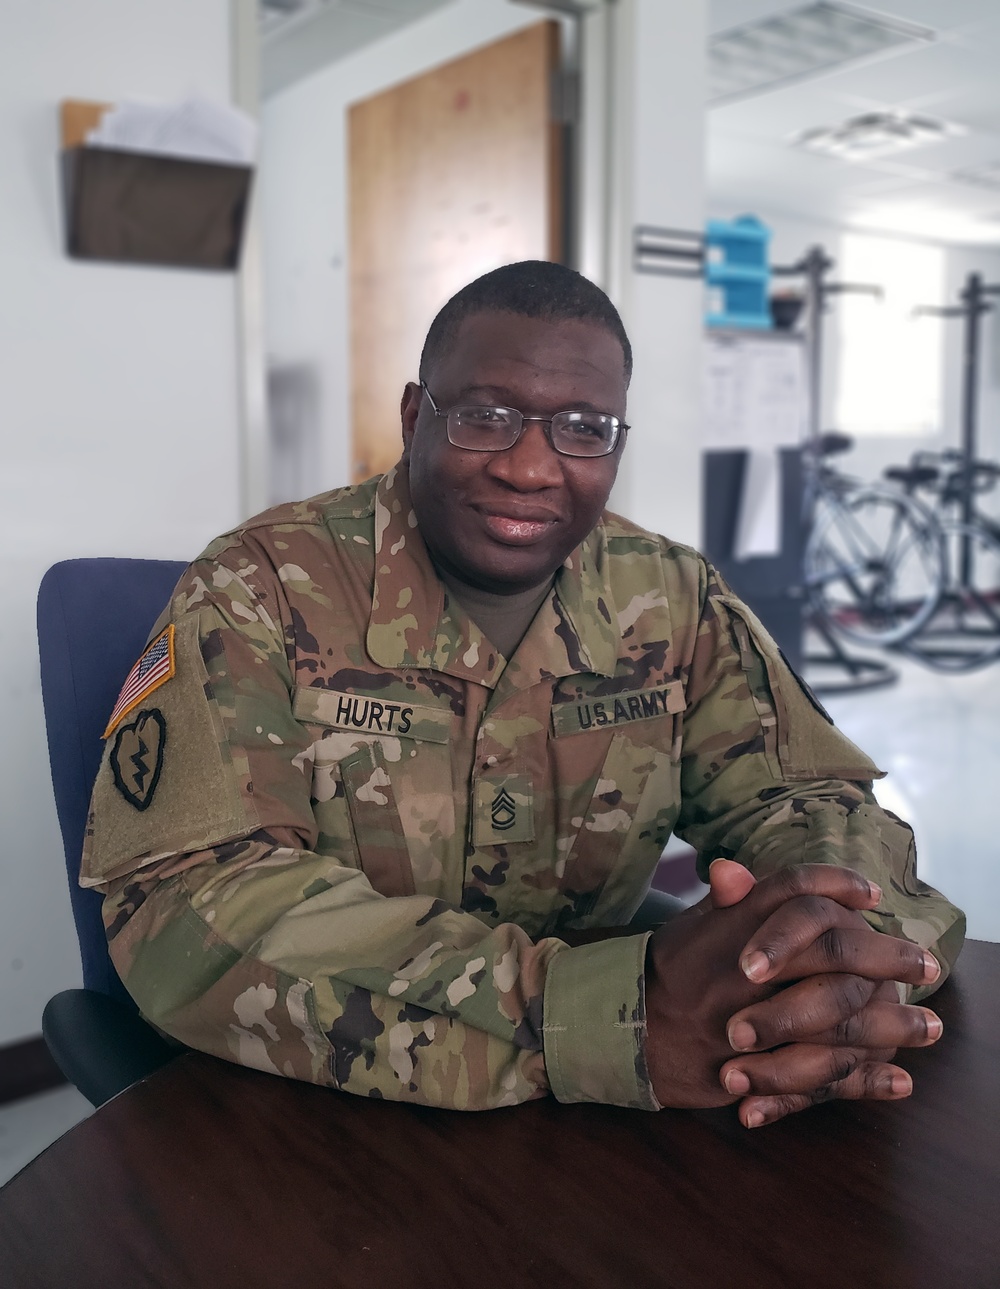 Fort Stewart's Sgt. 1st Class Hurts goes the extra mile for Soldiers